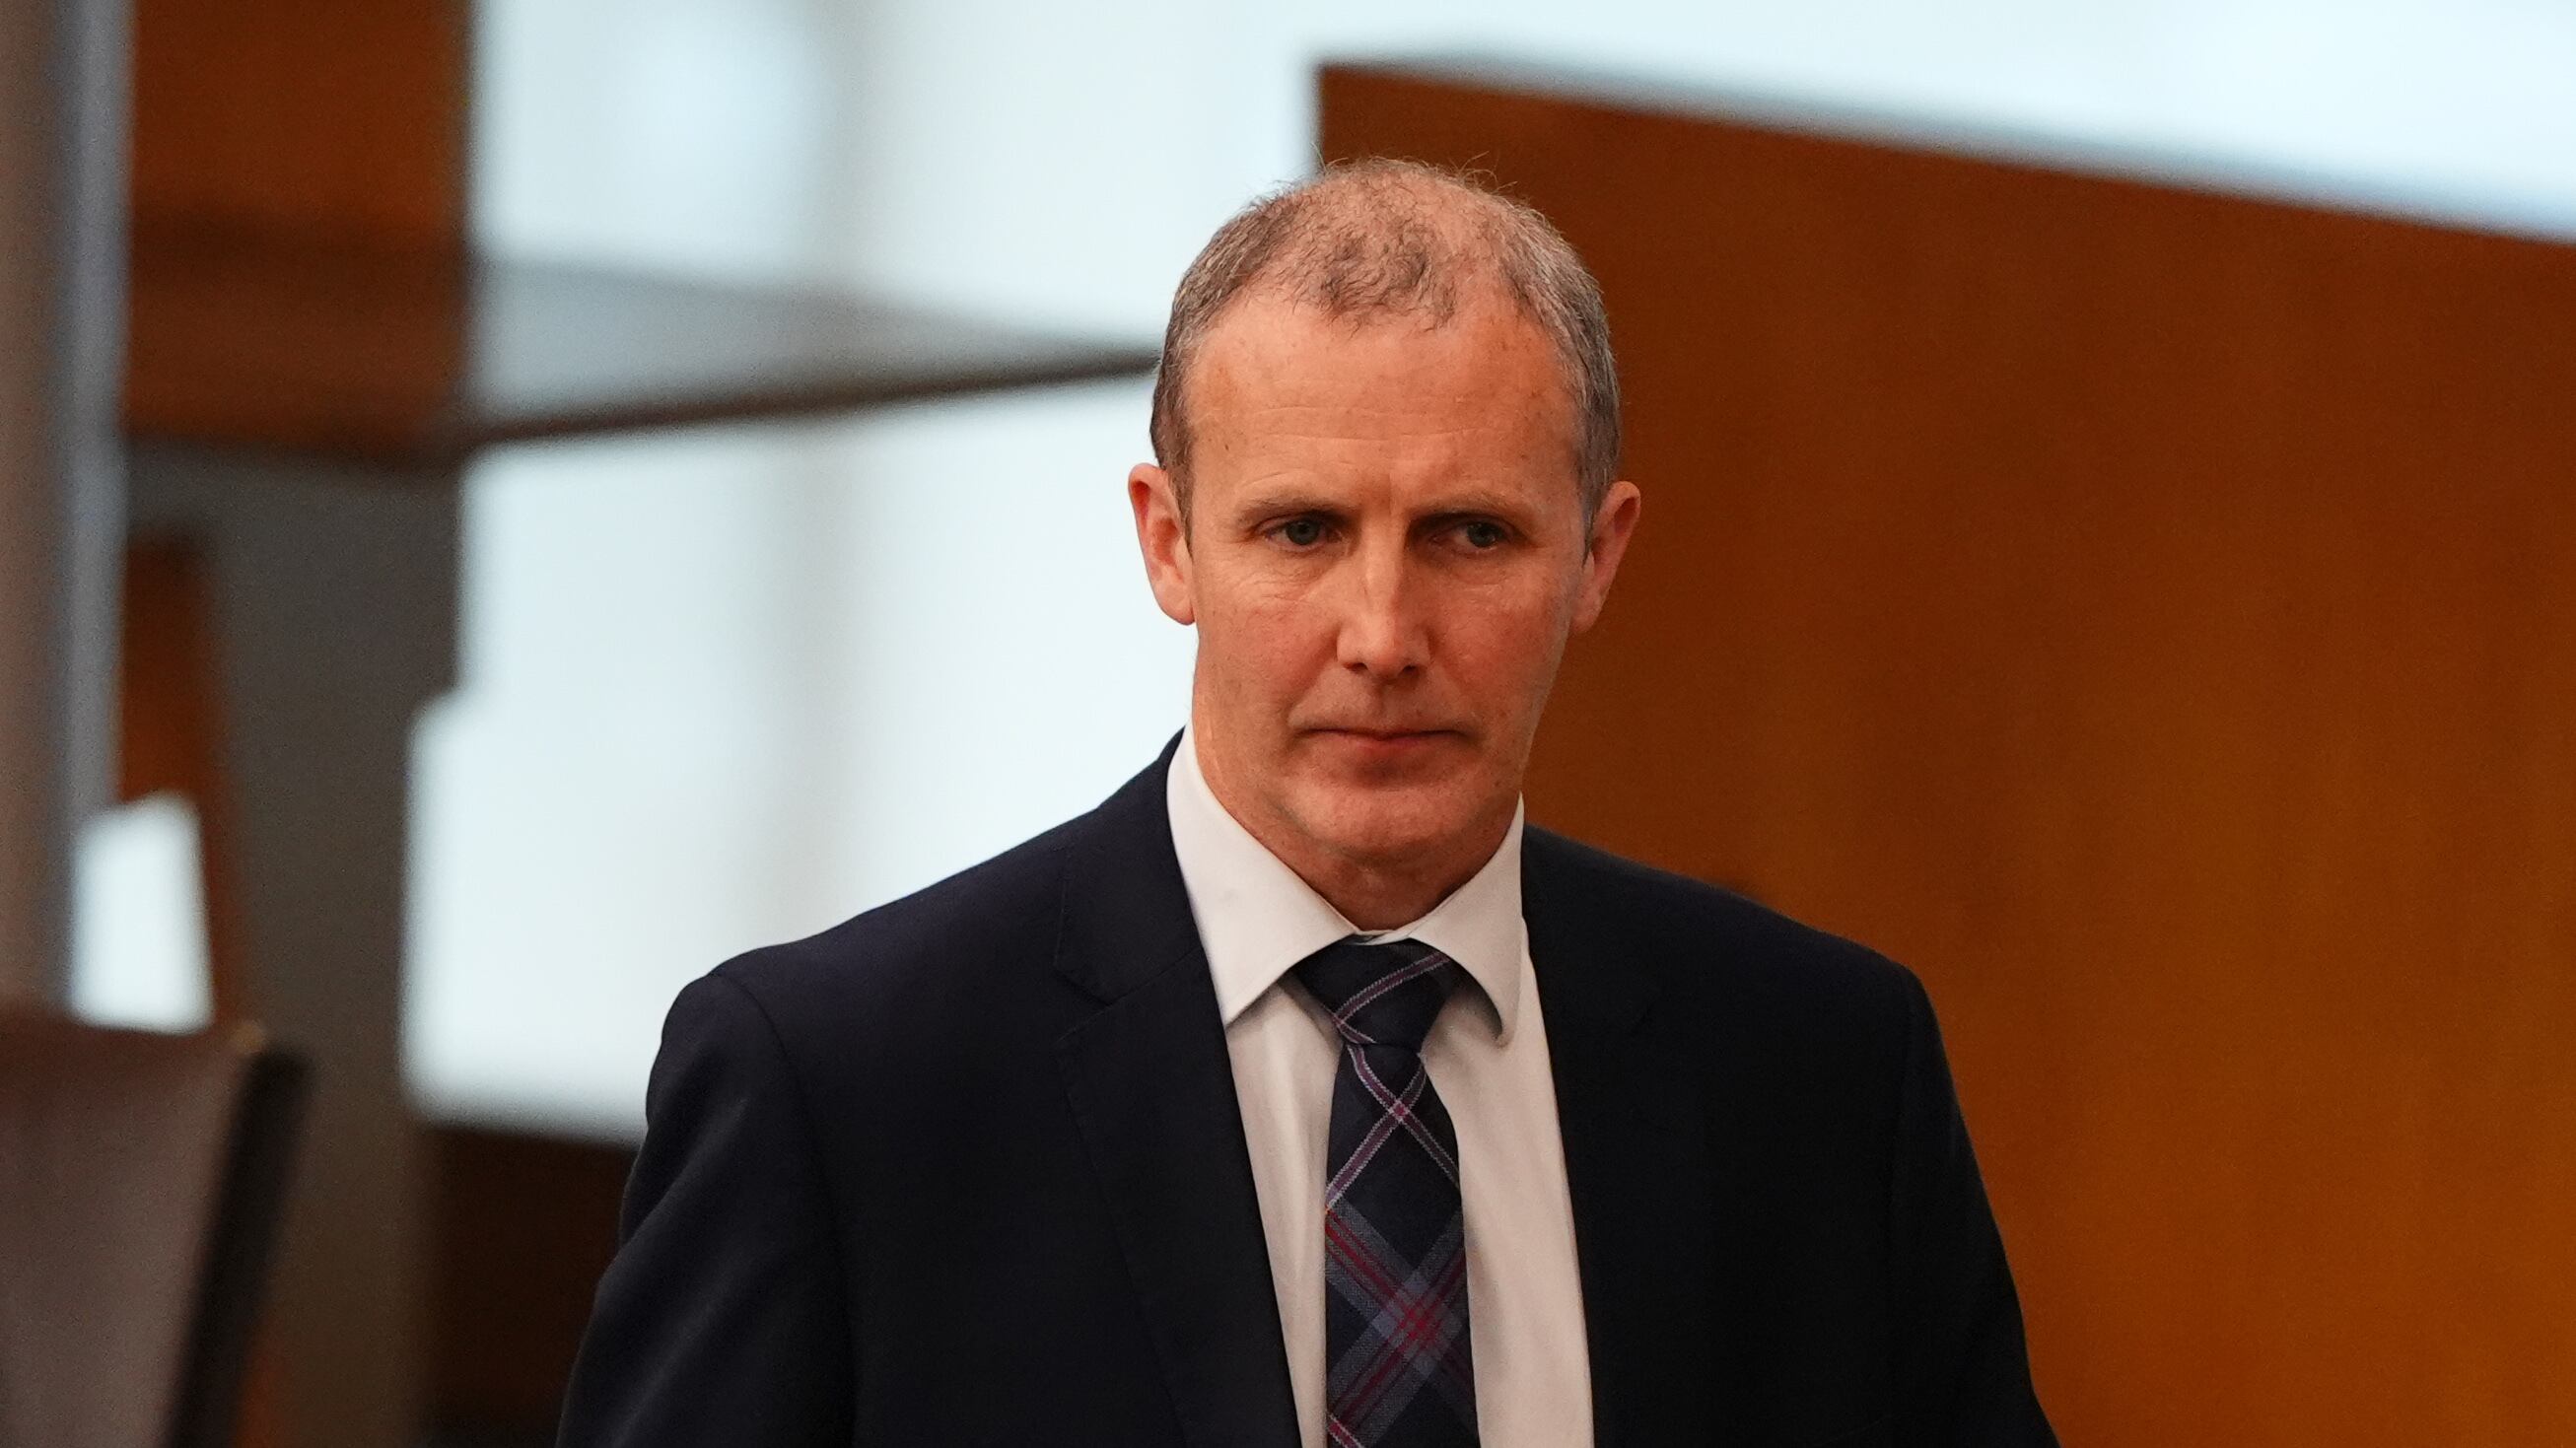 Michael Matheson has refused to step down as an MSP after a Holyrood committee recommended he is suspended for a period